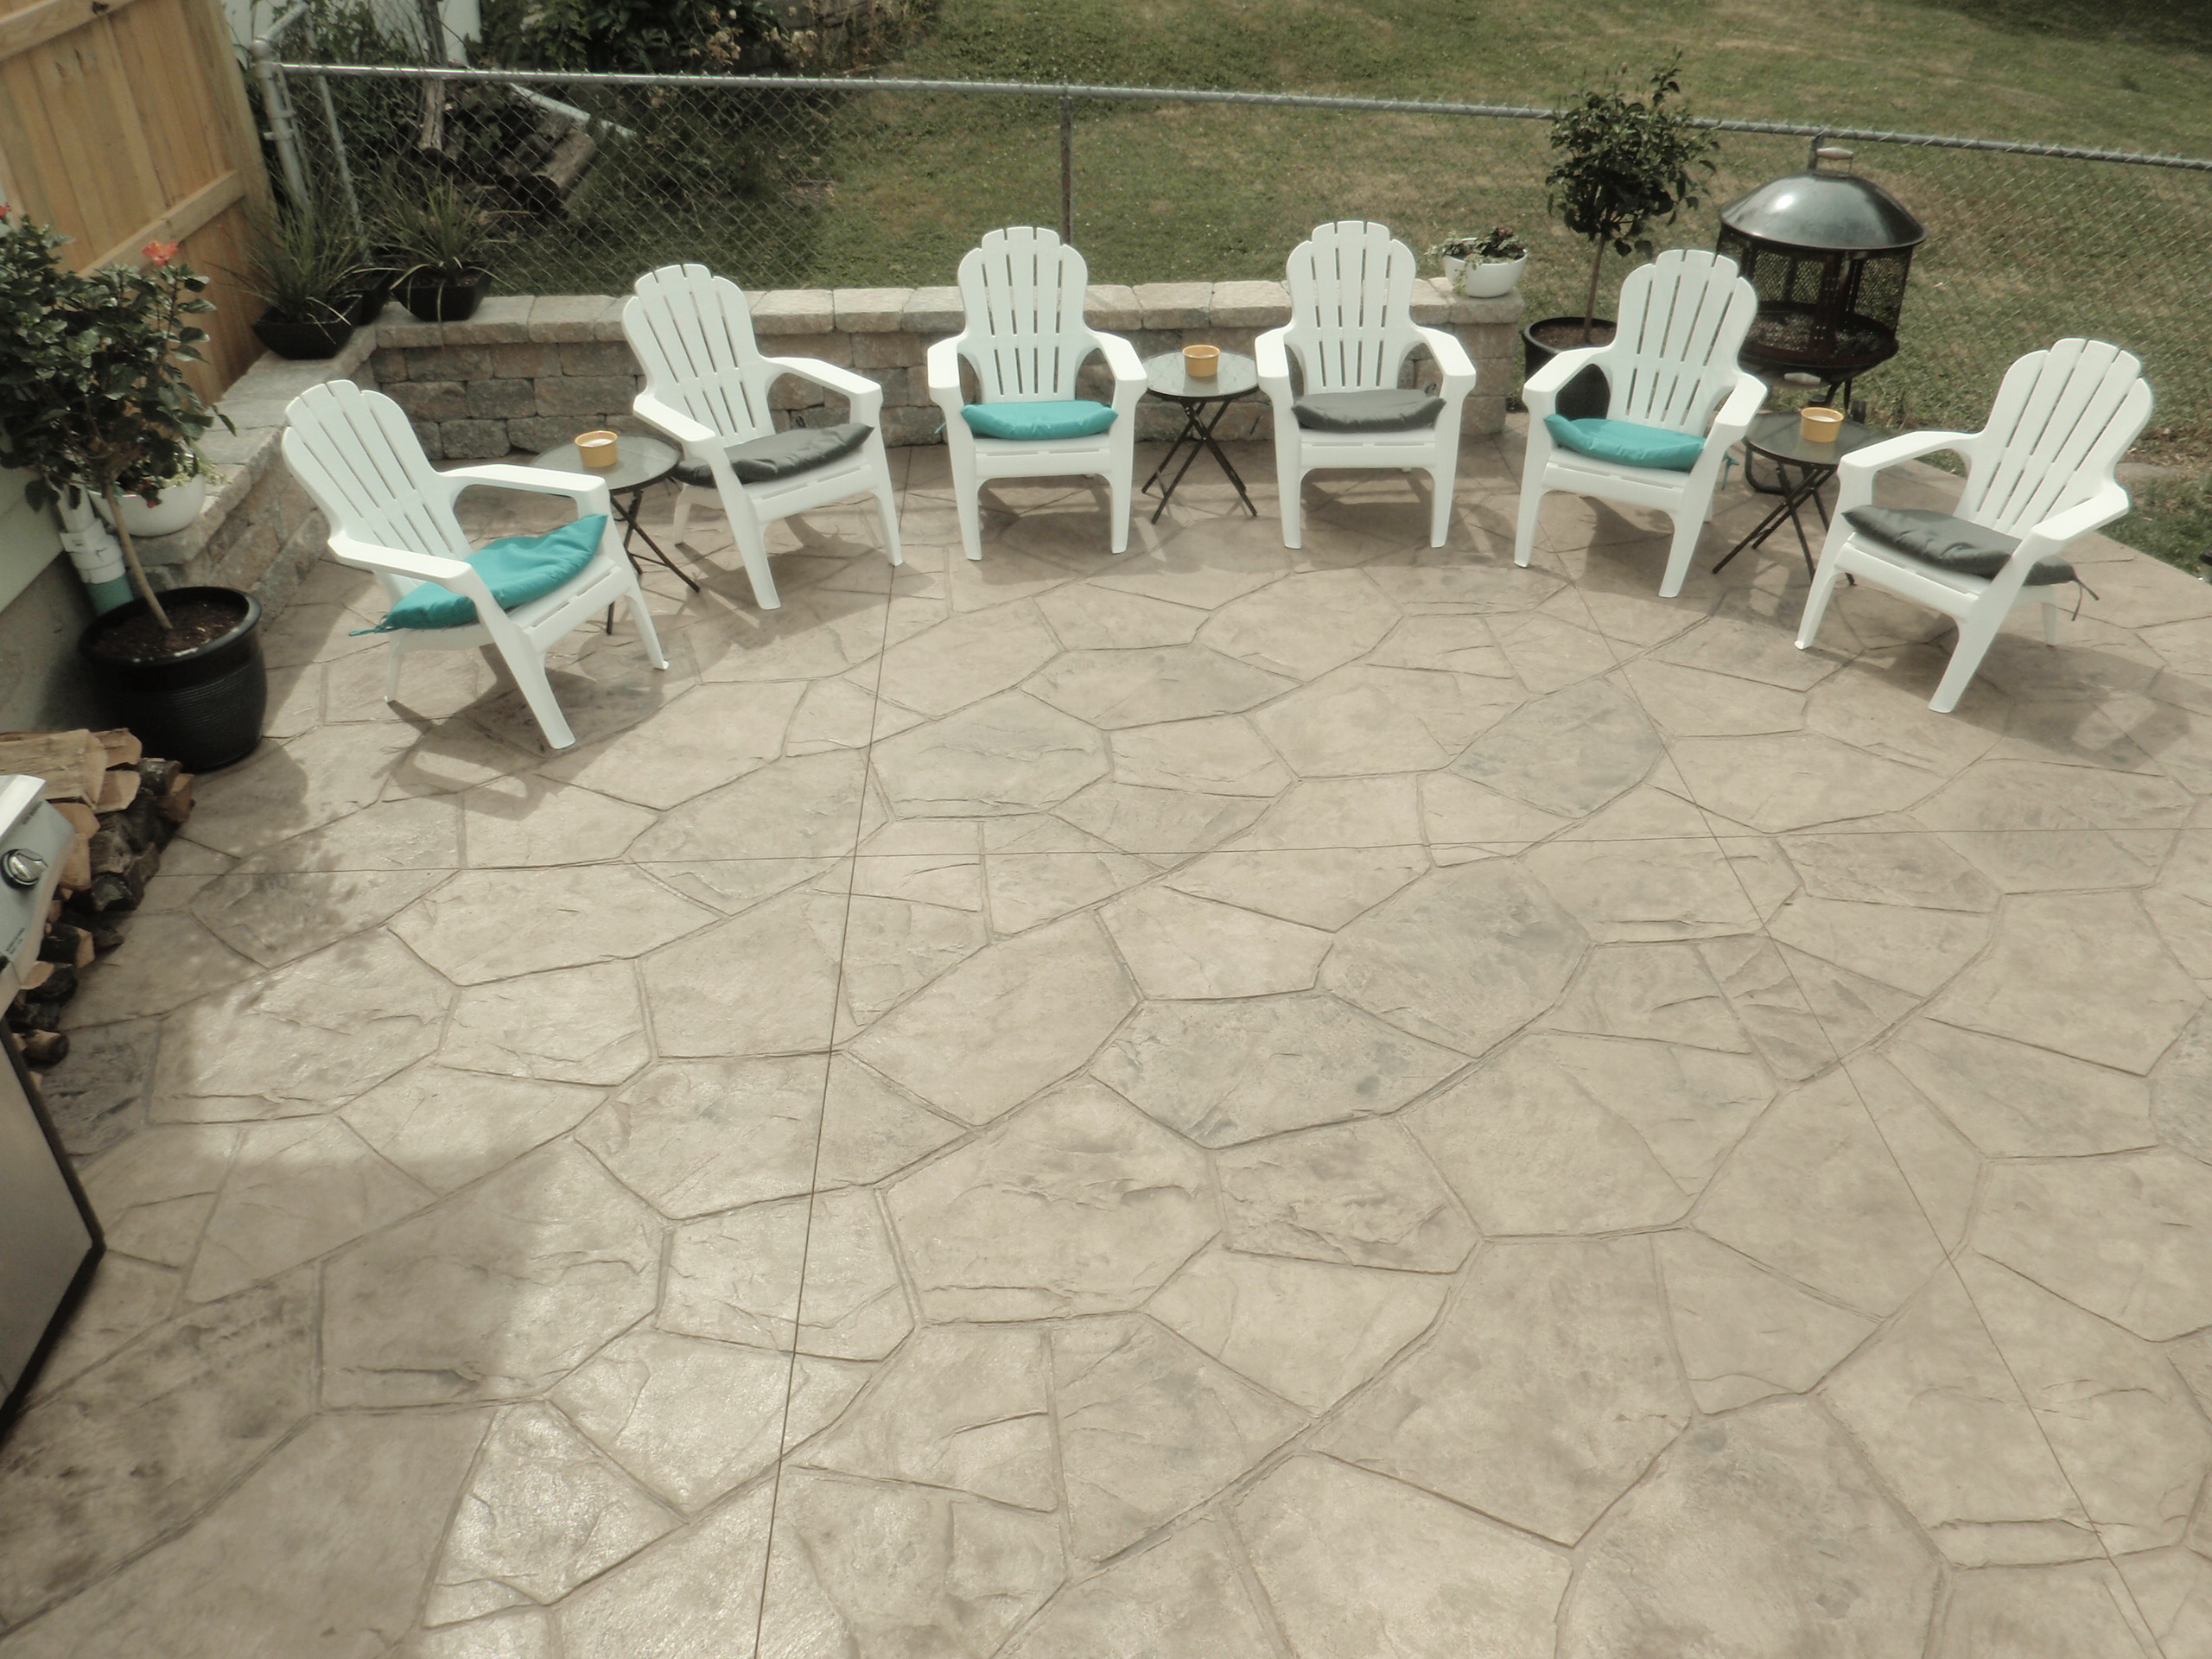 Stamped Concrete Stone with Basic Steps to Make